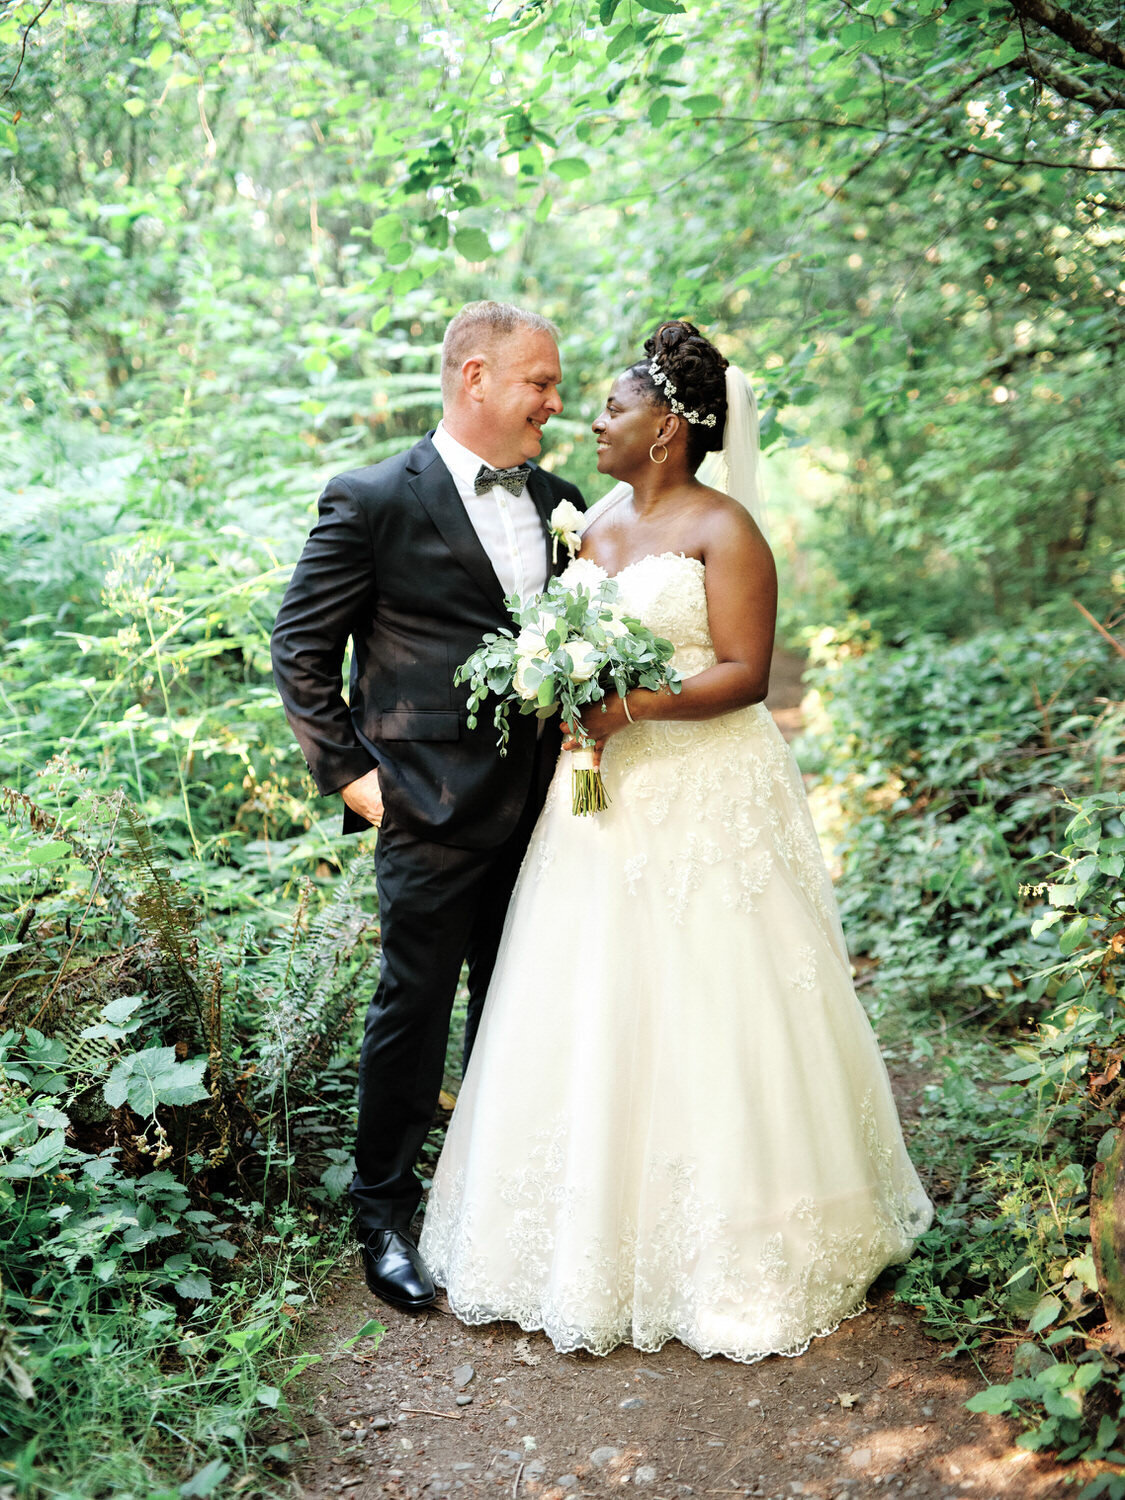 Bride and groom smile at each other in the woods surrounded by greenery